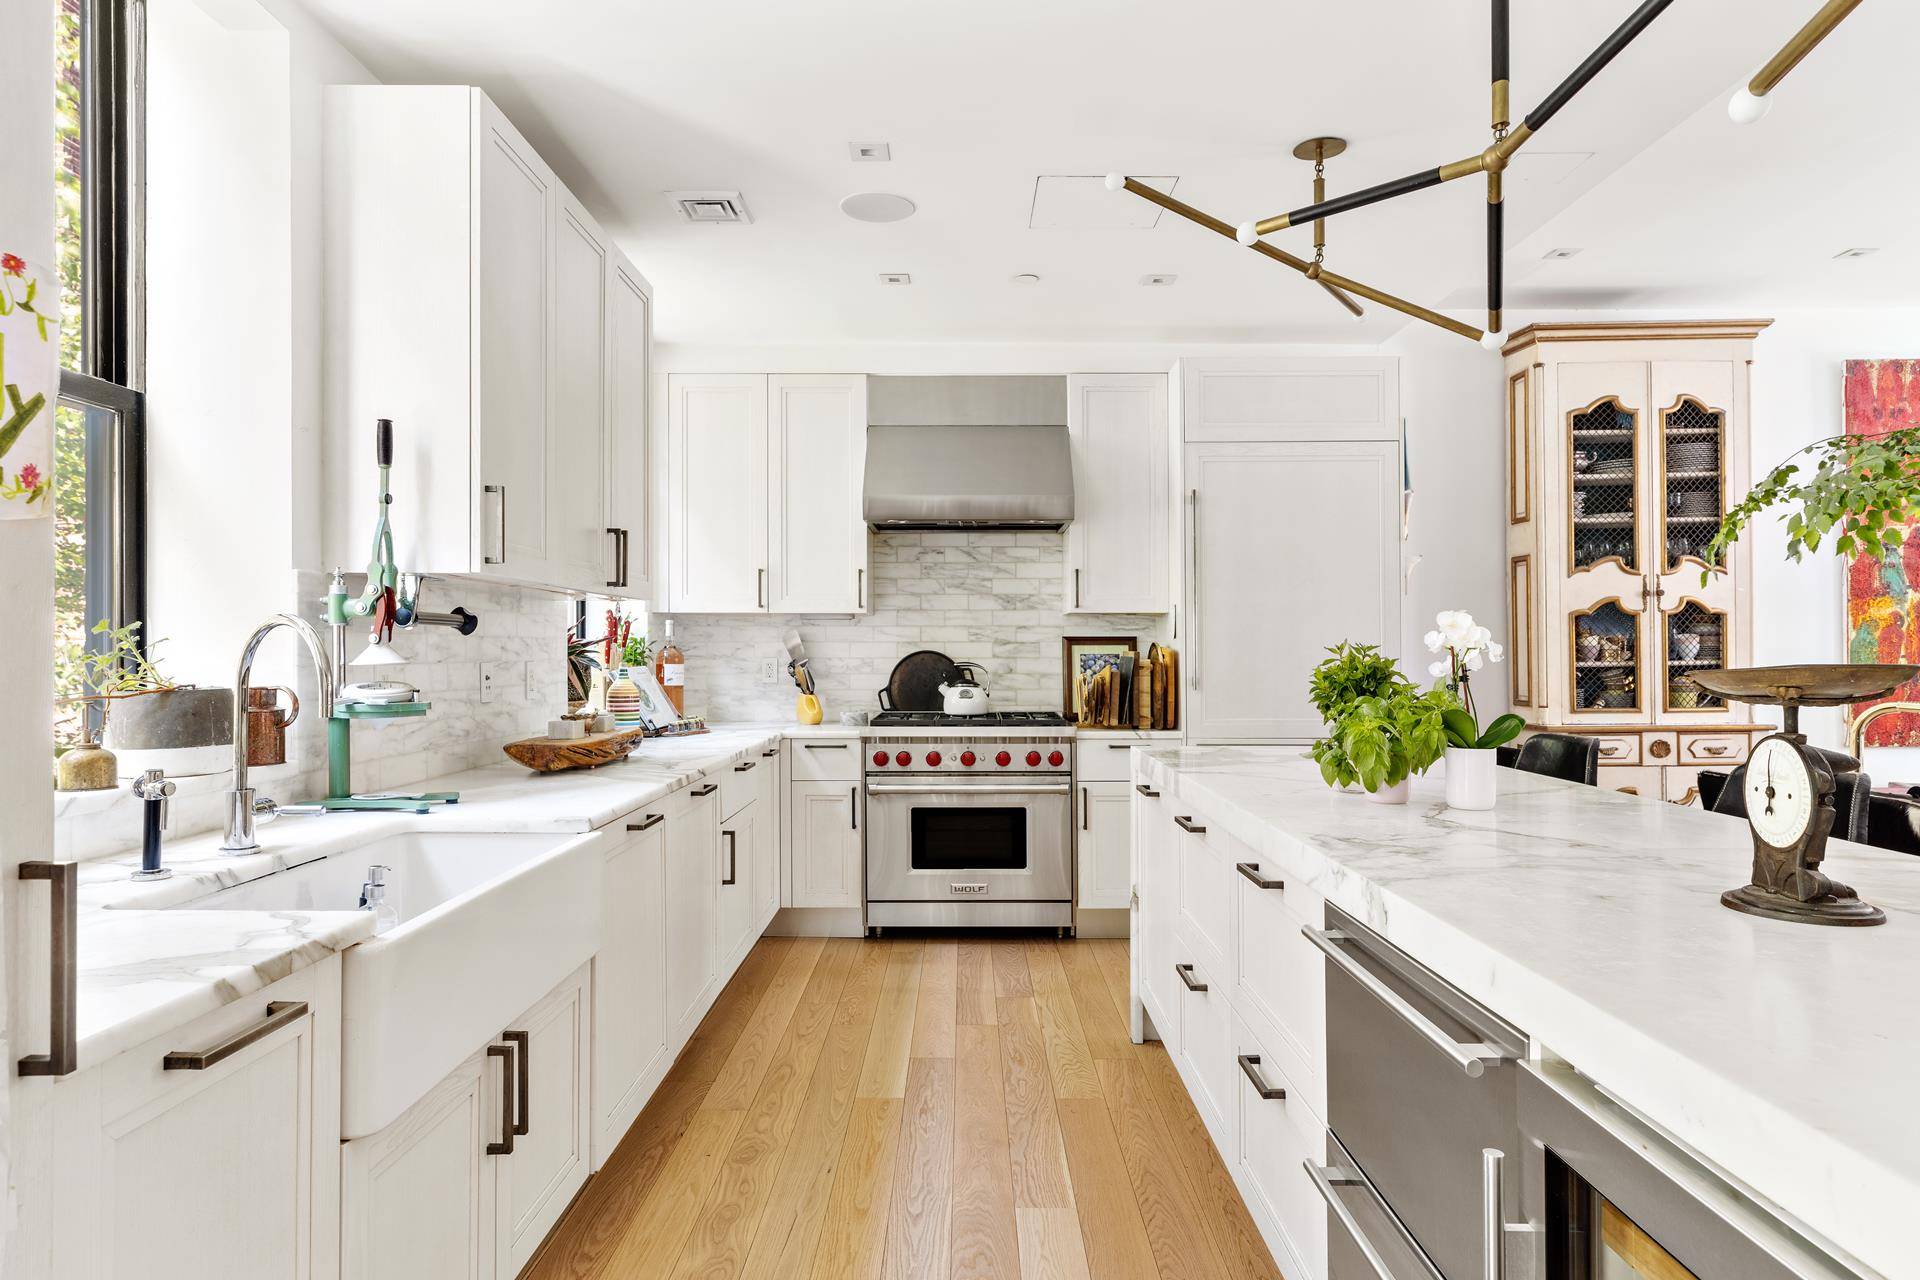 Artfully renovated with a designer's eye and modern sensibilities, 122 Congress sits on a tree lined block in Cobble Hill.